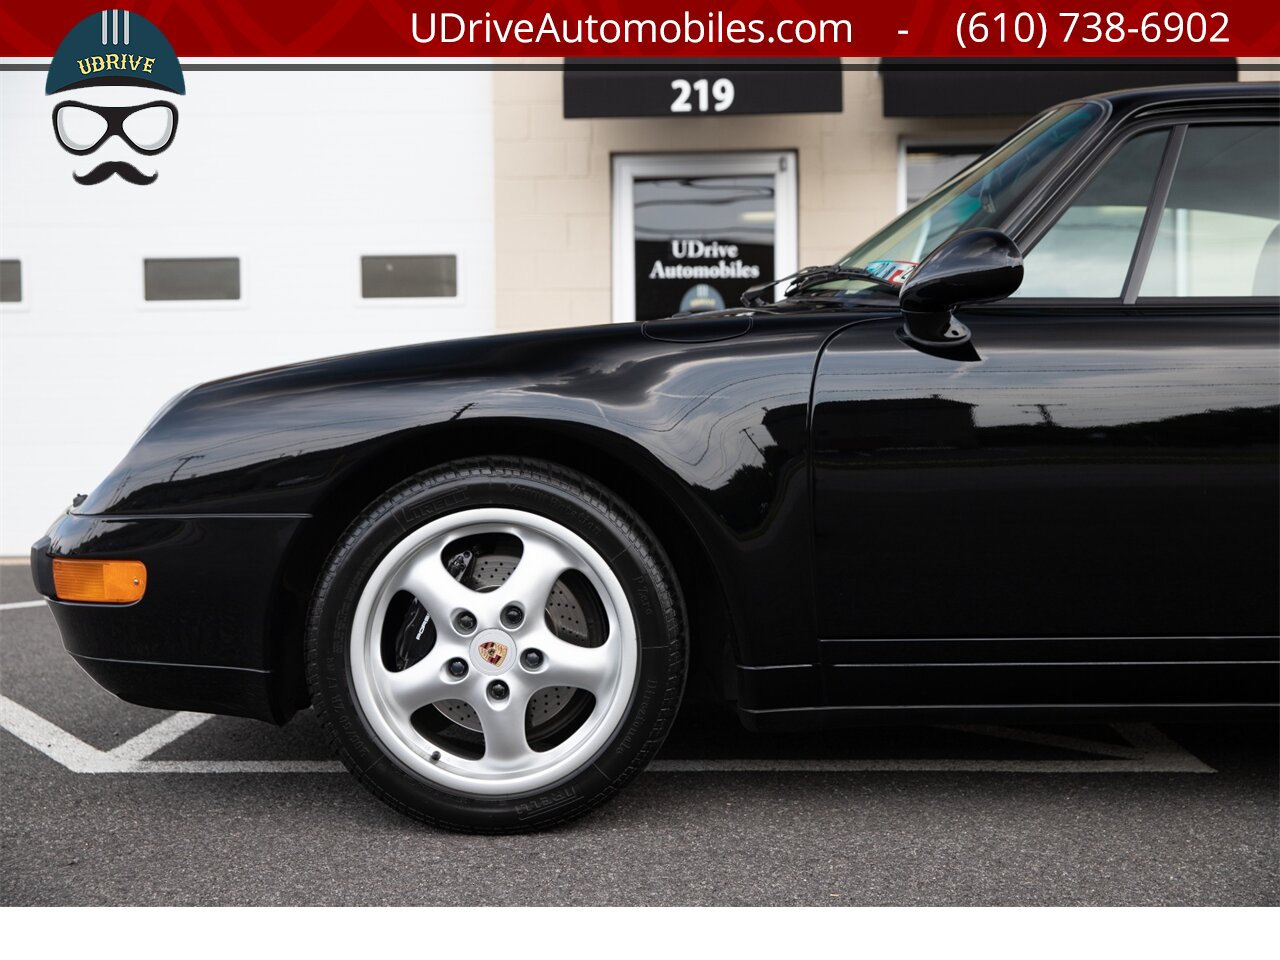 1995 Porsche 911 993 Carrera 6 Speed 16k Miles Service History  Black over Black Spectacular Stock Example 1 Owner Clean Carfax - Photo 7 - West Chester, PA 19382